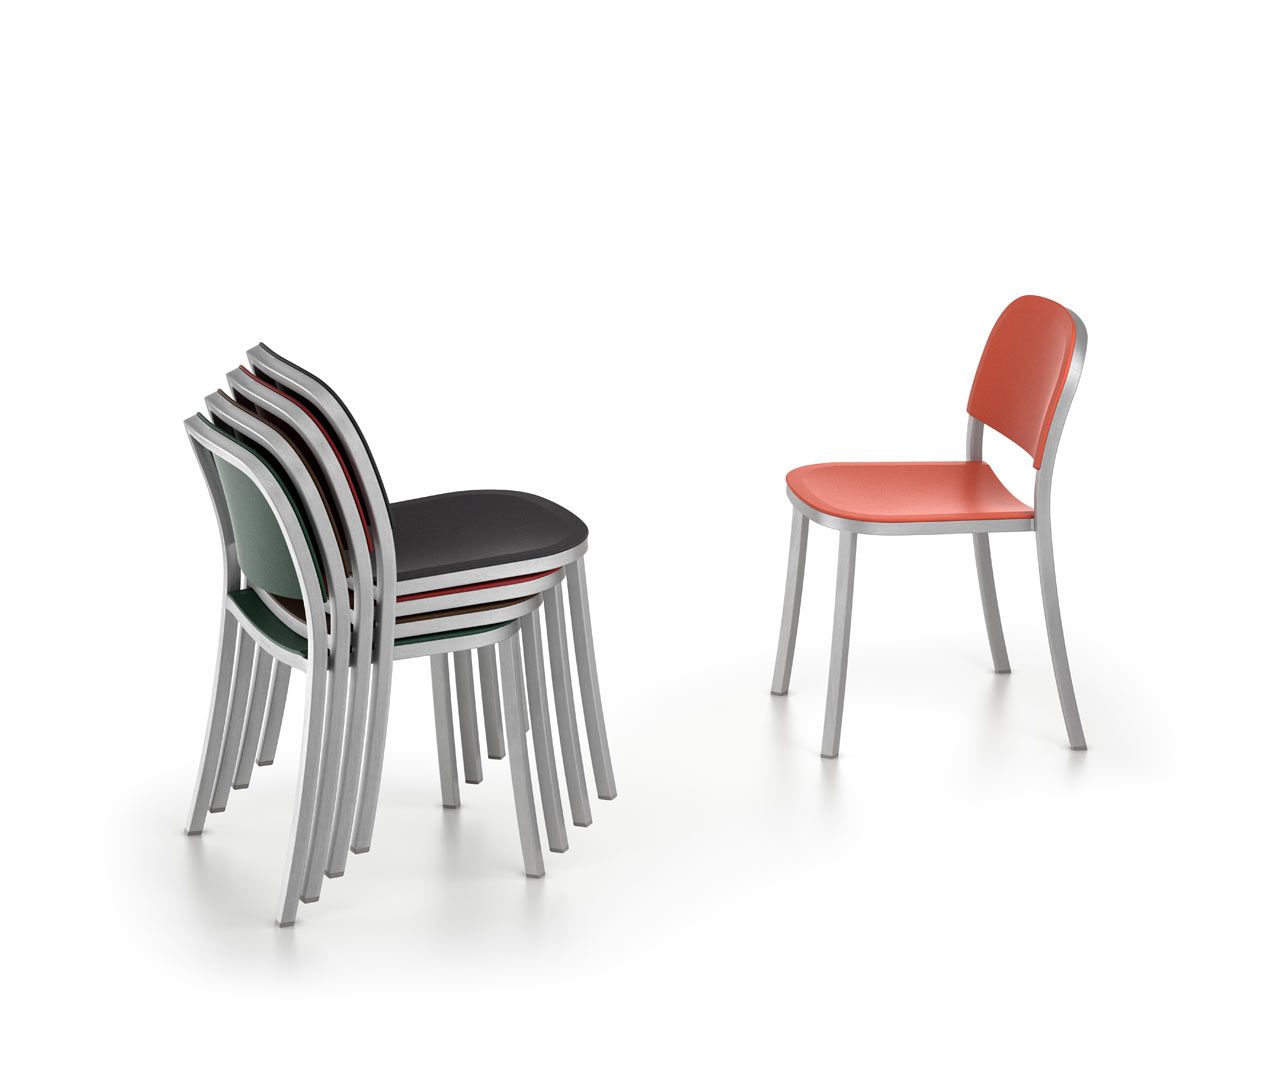 Emeco Launches the 1 Inch Collection by Jasper Morrison